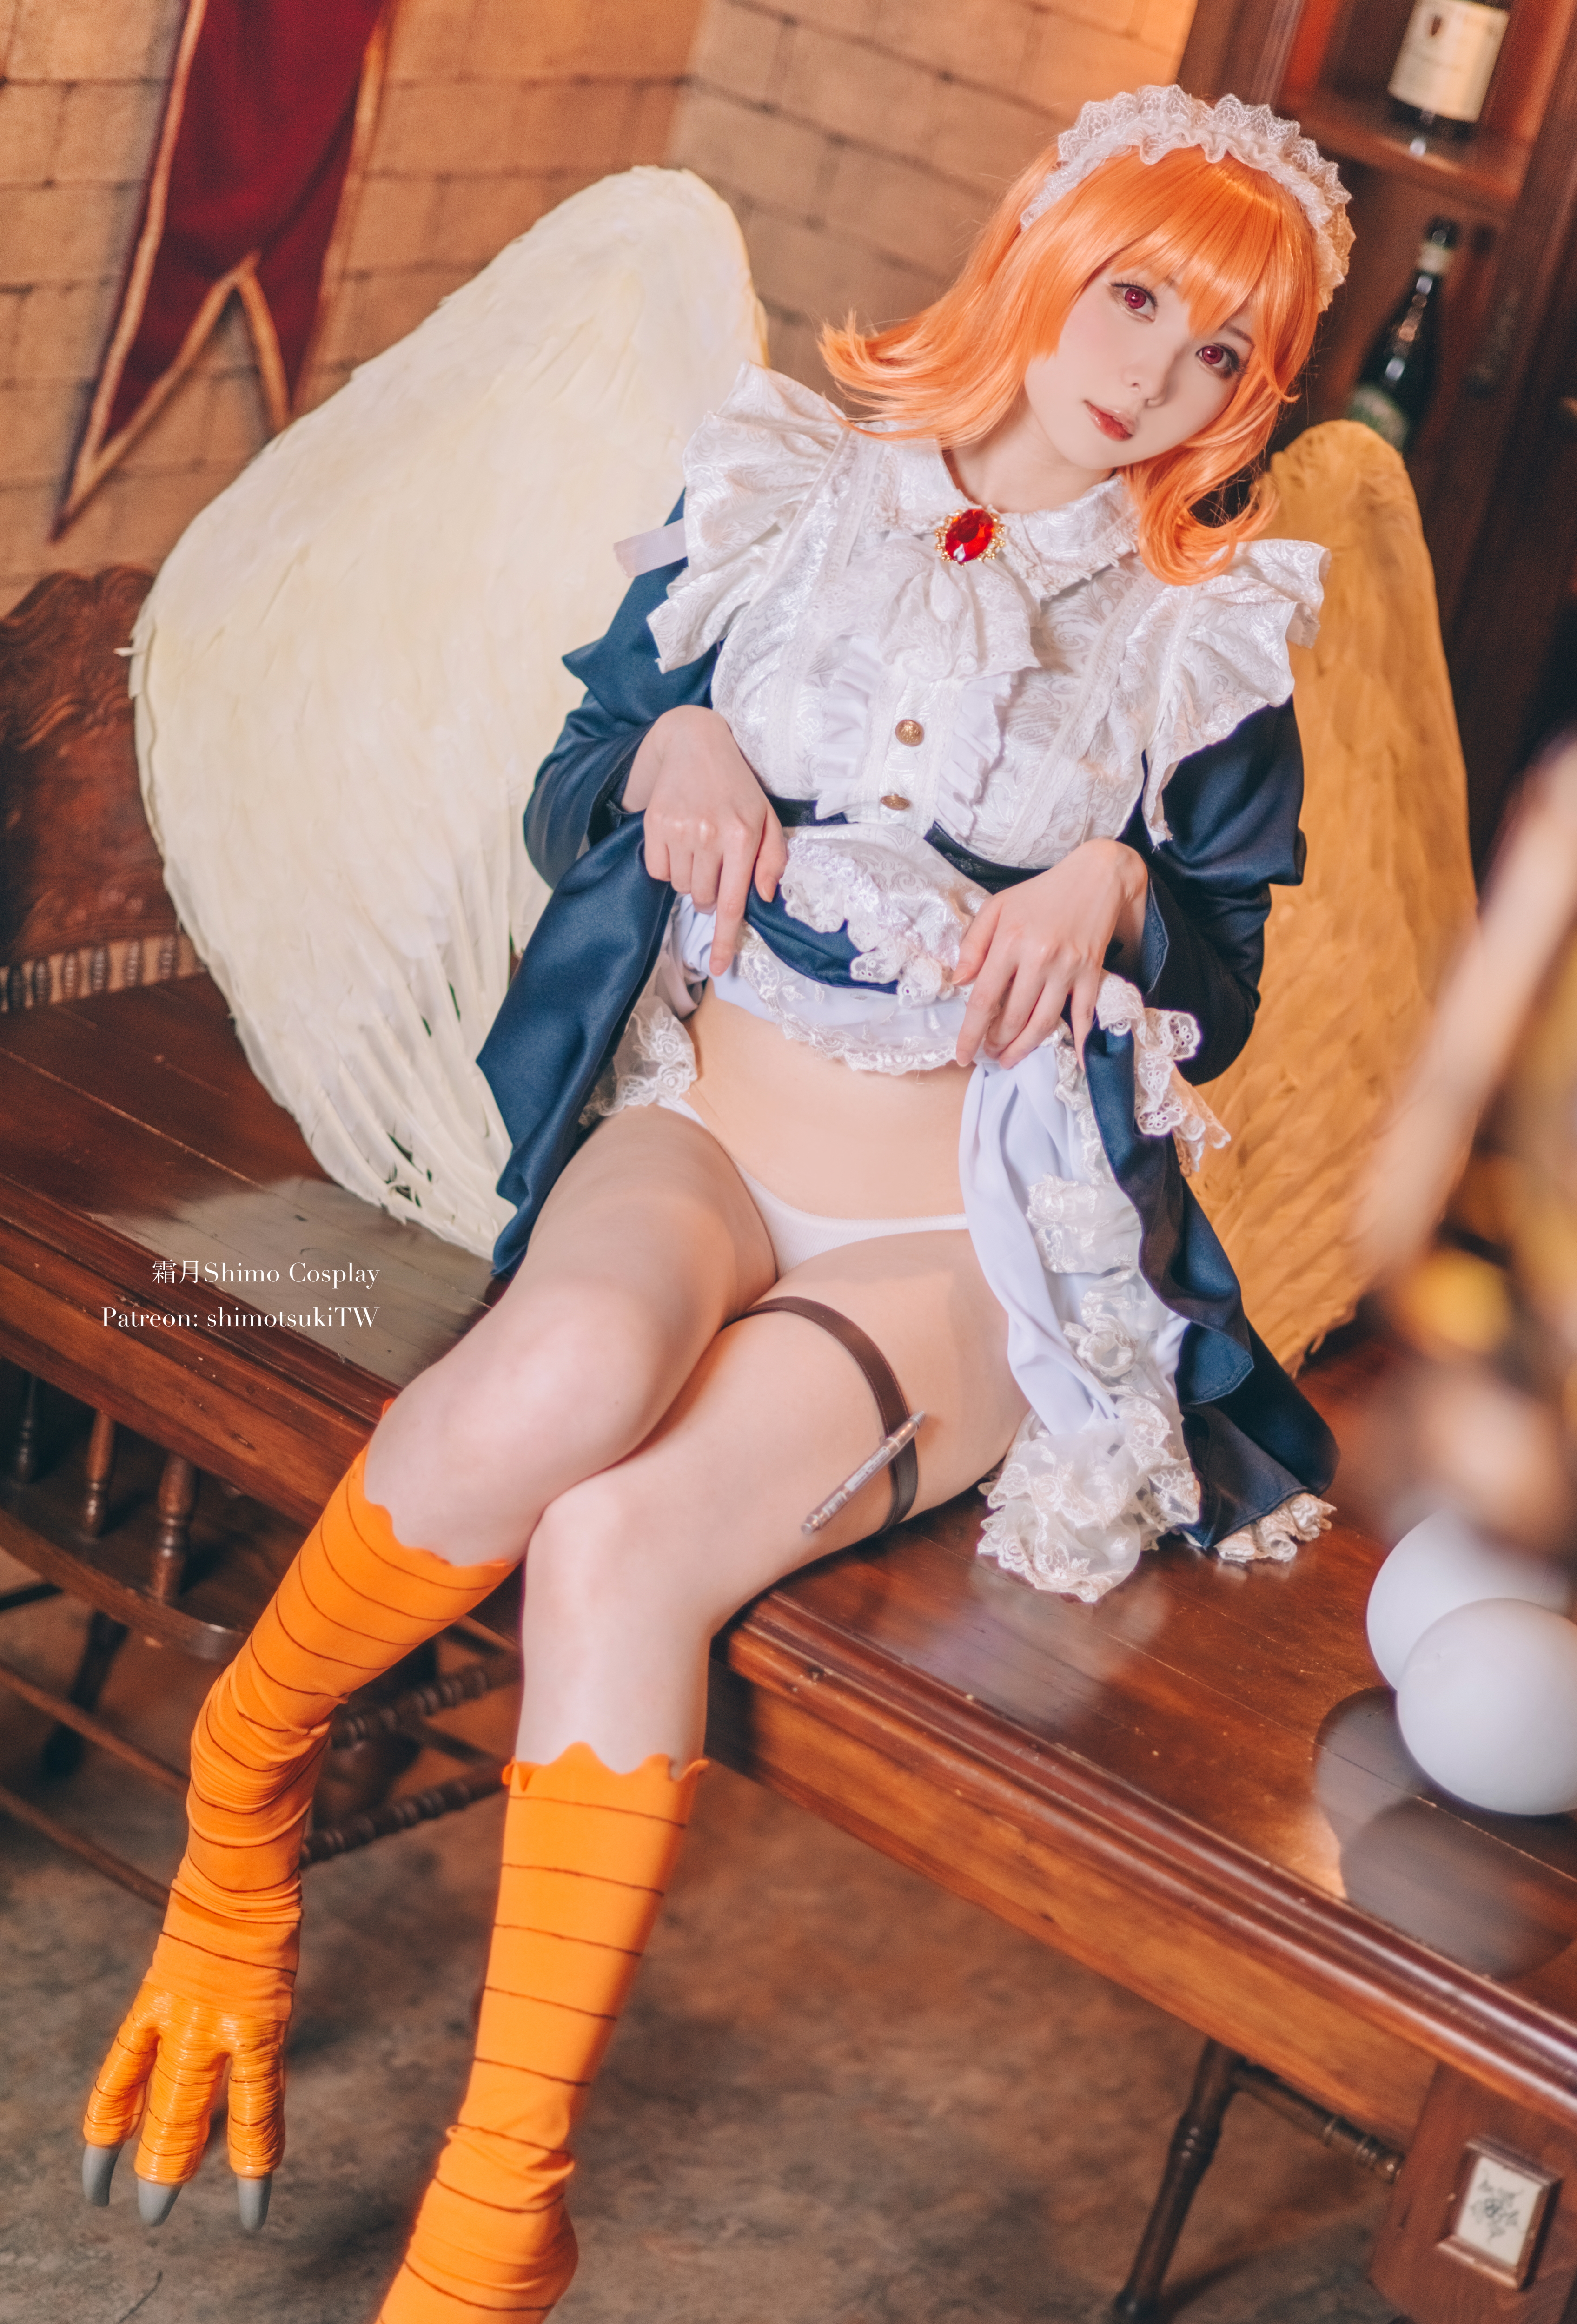 People 3392x5000 Shimo Cosplay women model Asian Meidri Interspecies Reviewers anime anime girls maid maid outfit monster girl wings women indoors eggs underwear panties lifting dress cosplay